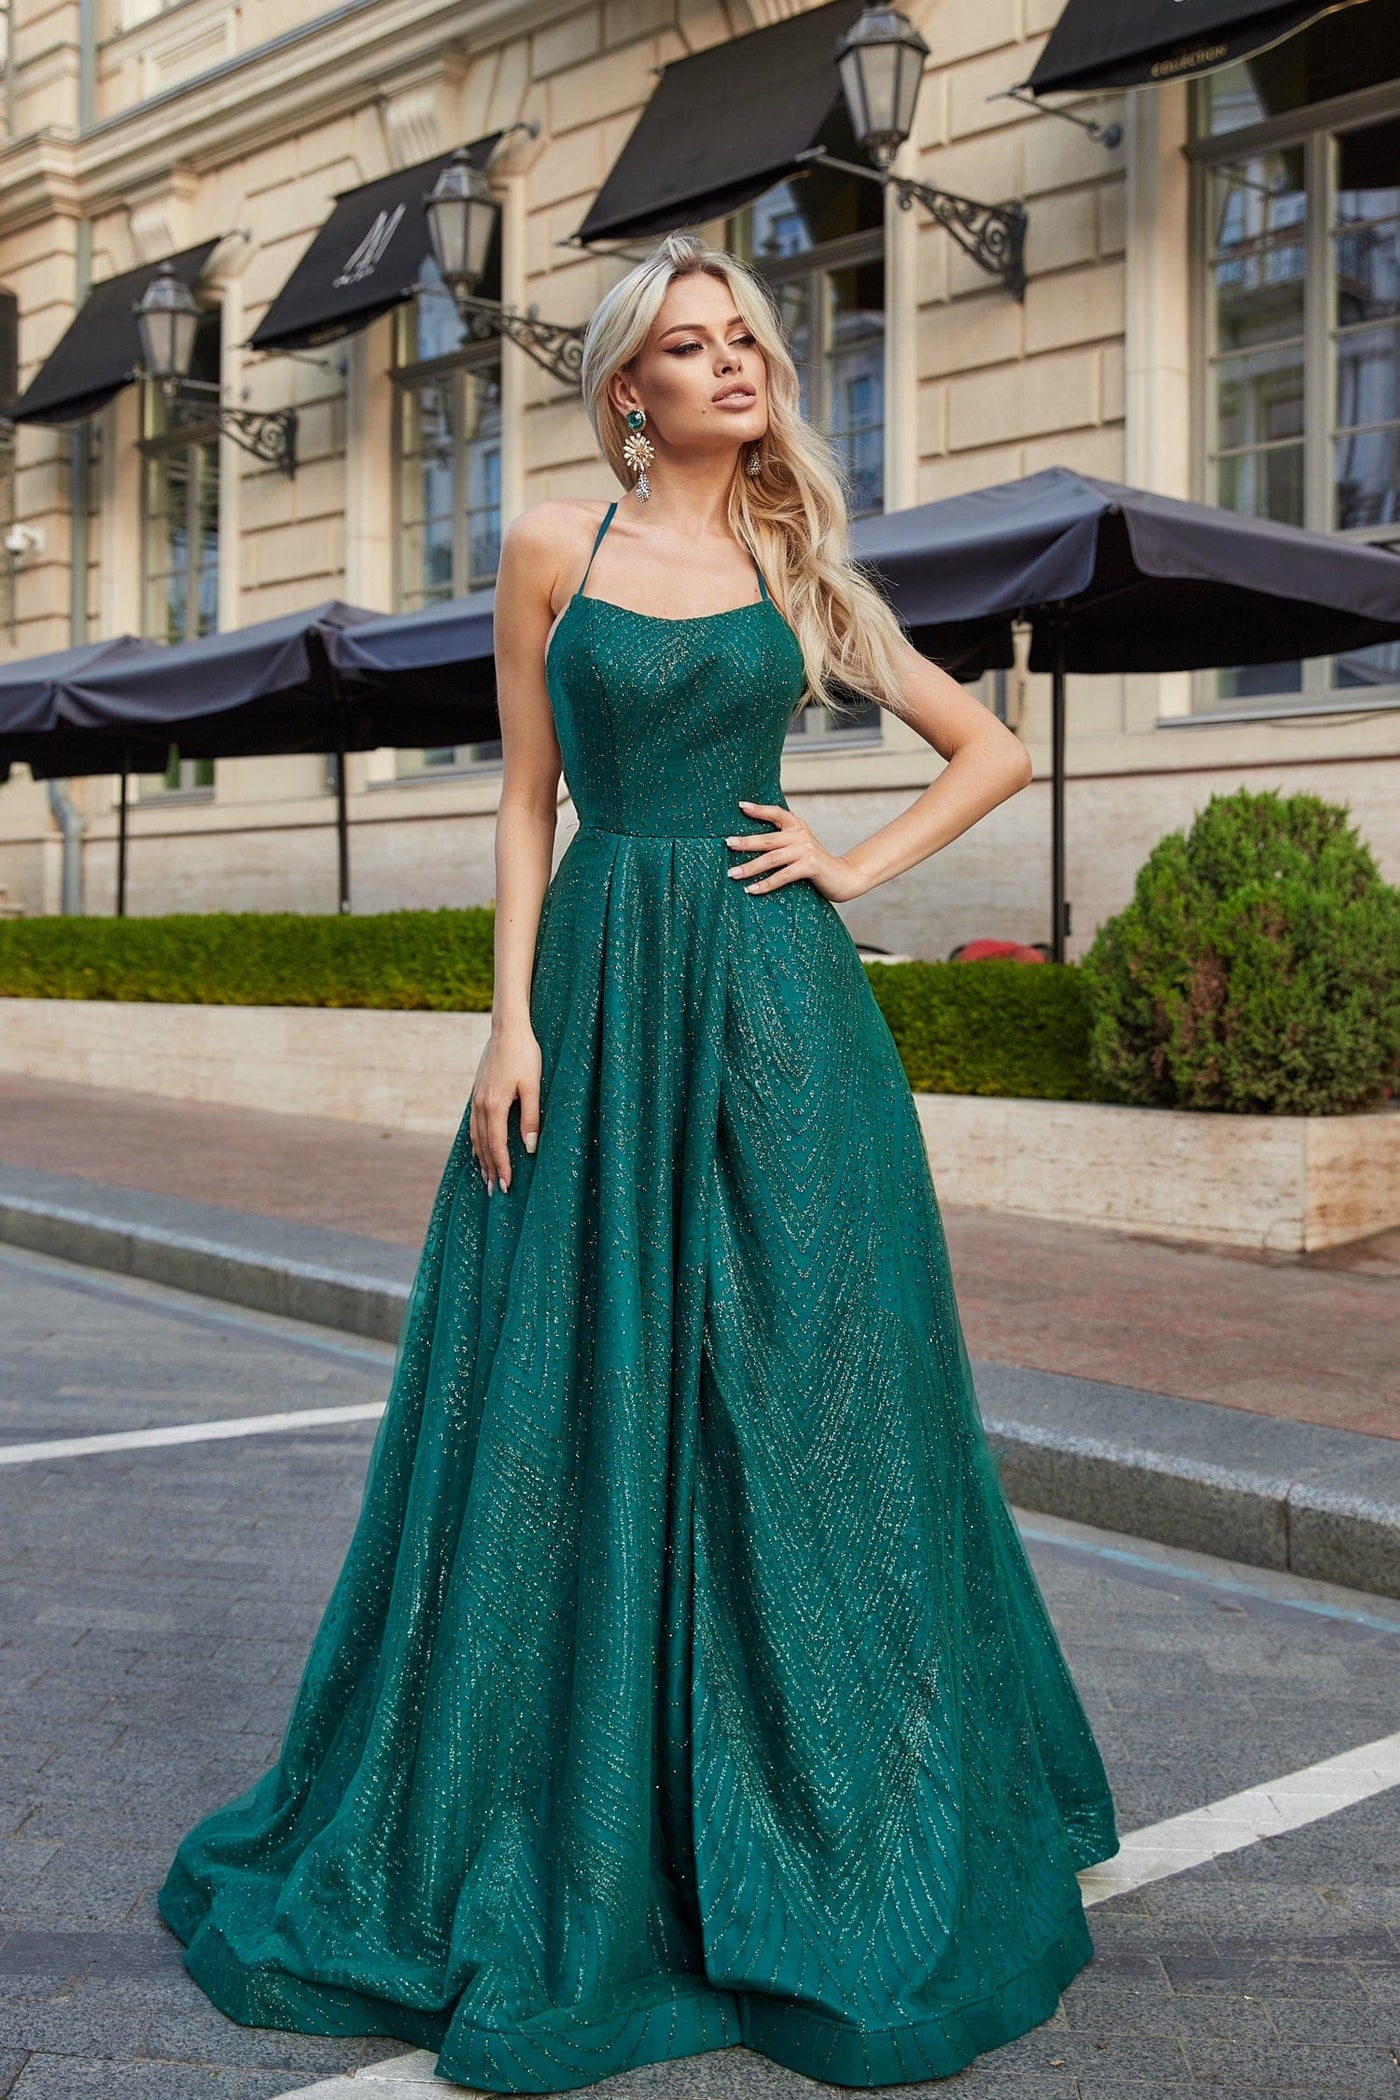 TINA HOLLY 5 DAY HIRE / Sprinkle Glitter Formal Gown - Emerald